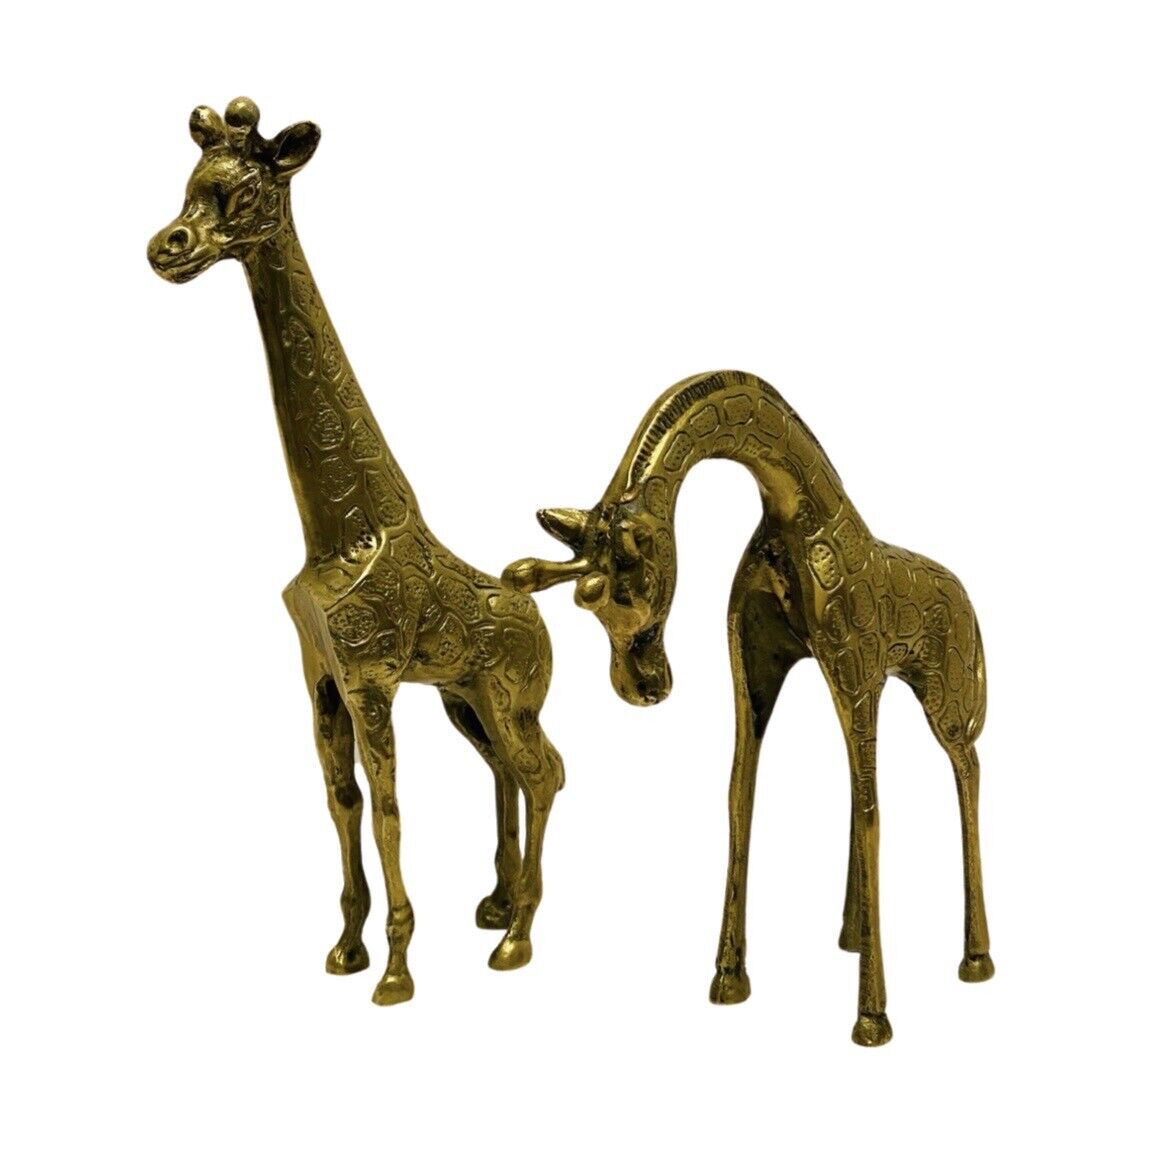 Pair Of Vintage Hollywood Regency Solid Brass Giraffes Large And Small